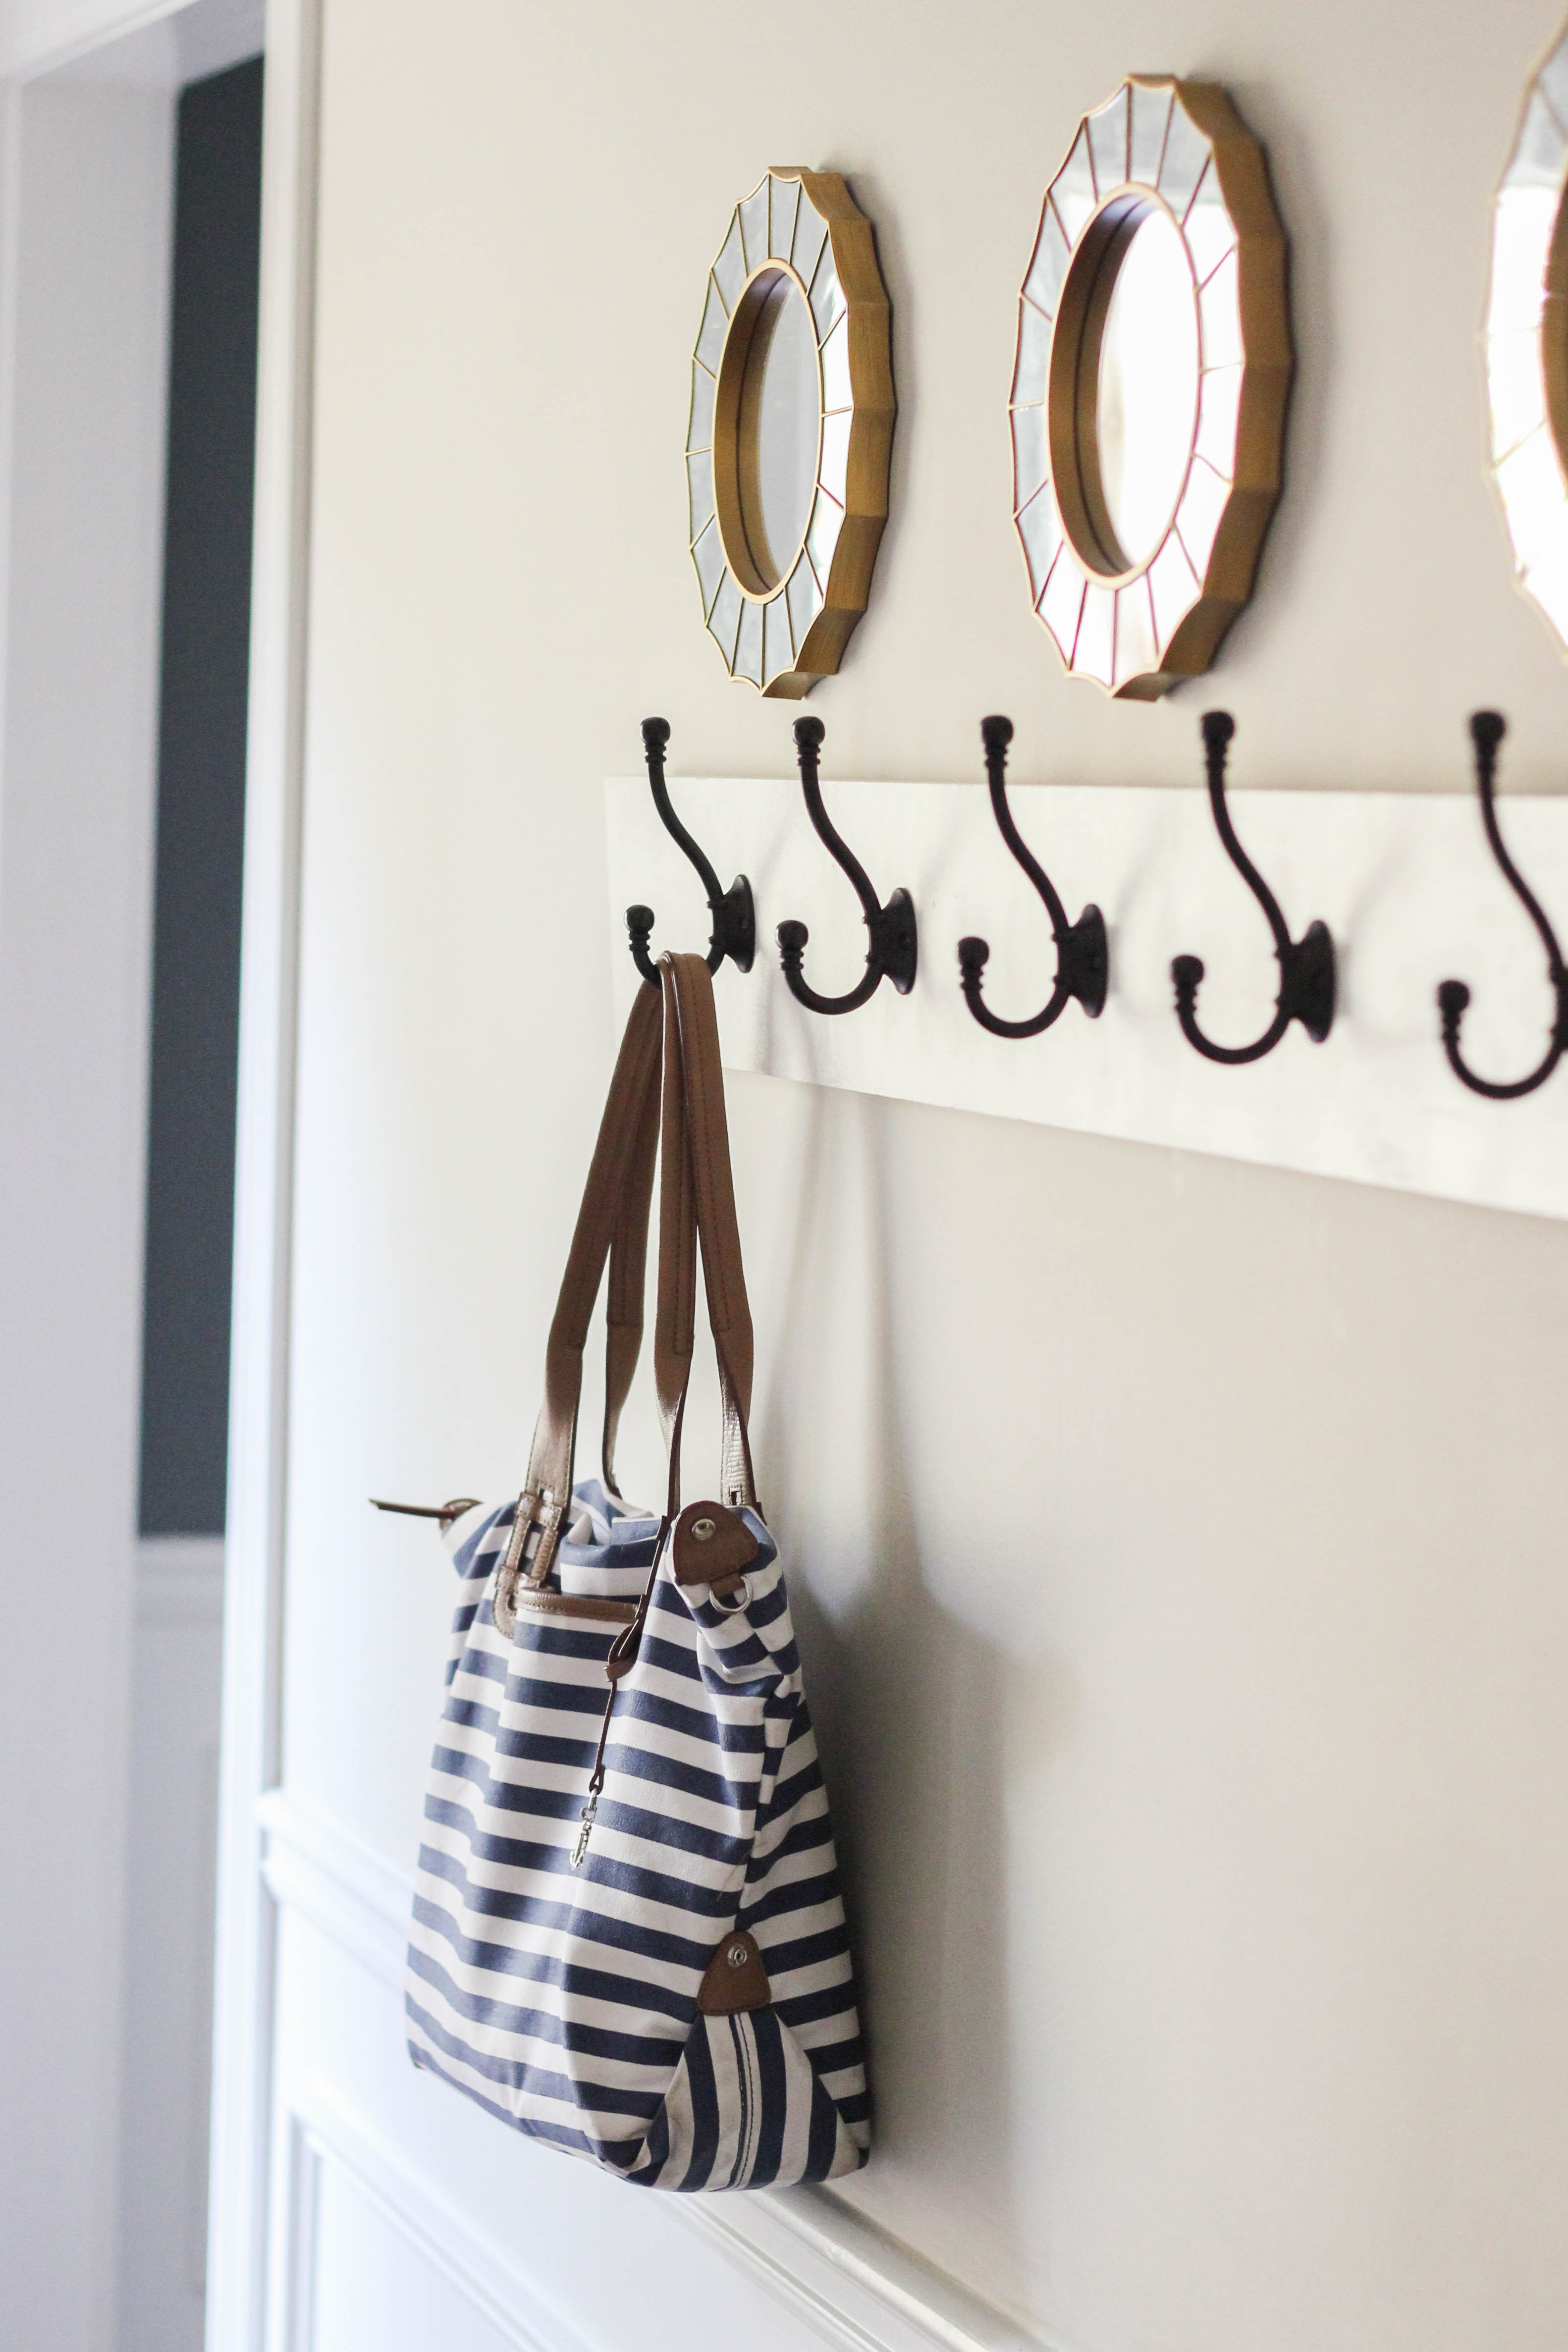 How To Build A Wall Mounted Coat Rack, Diy Coat Hooks With Shelf